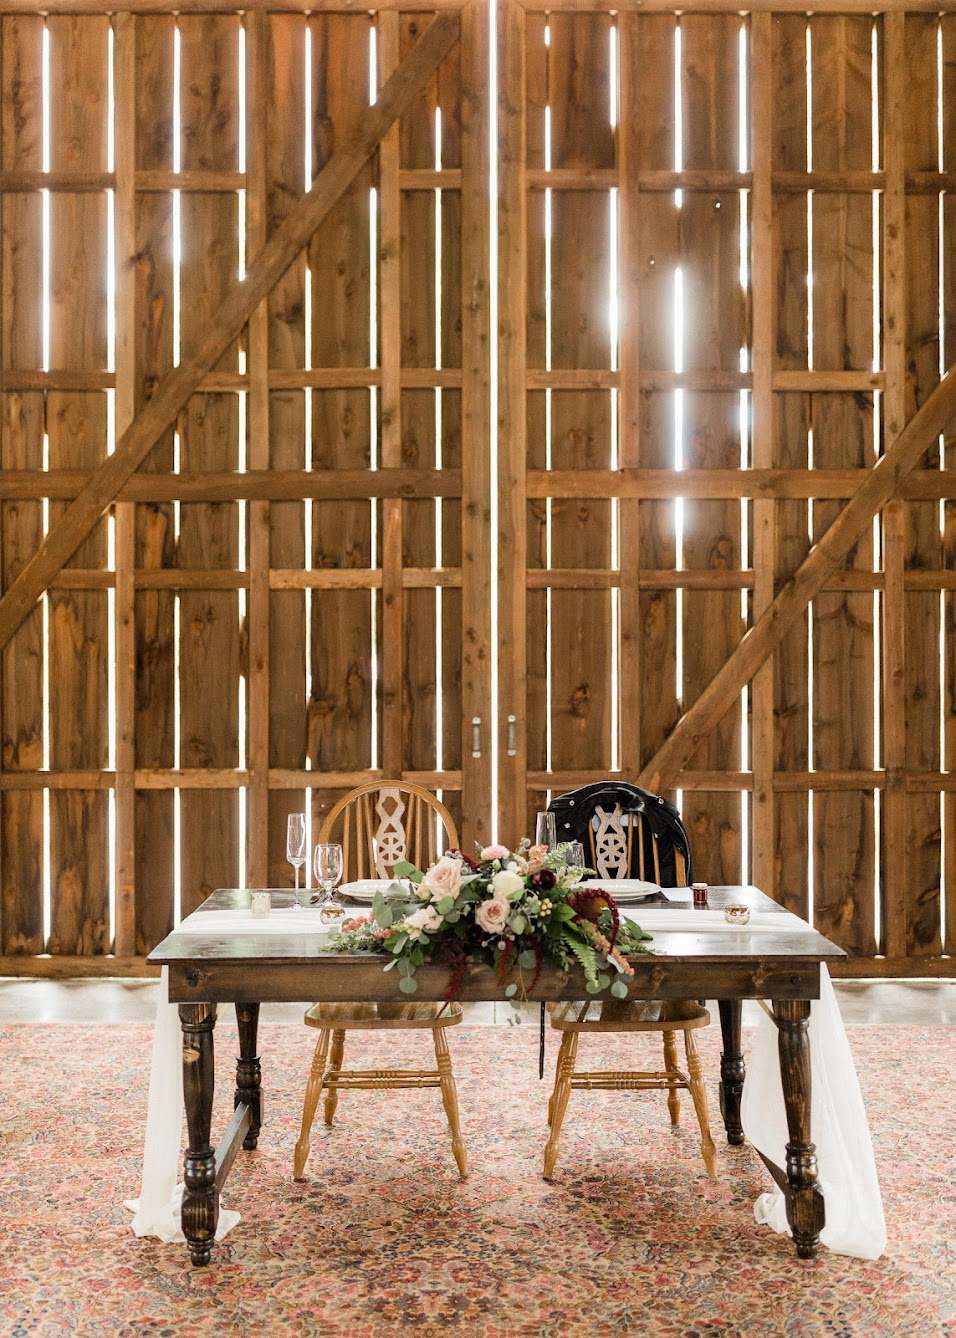 An antique wooden table set for the couple, always known as a sweetheart table. The bride's bouquet sits in the middle of the table.